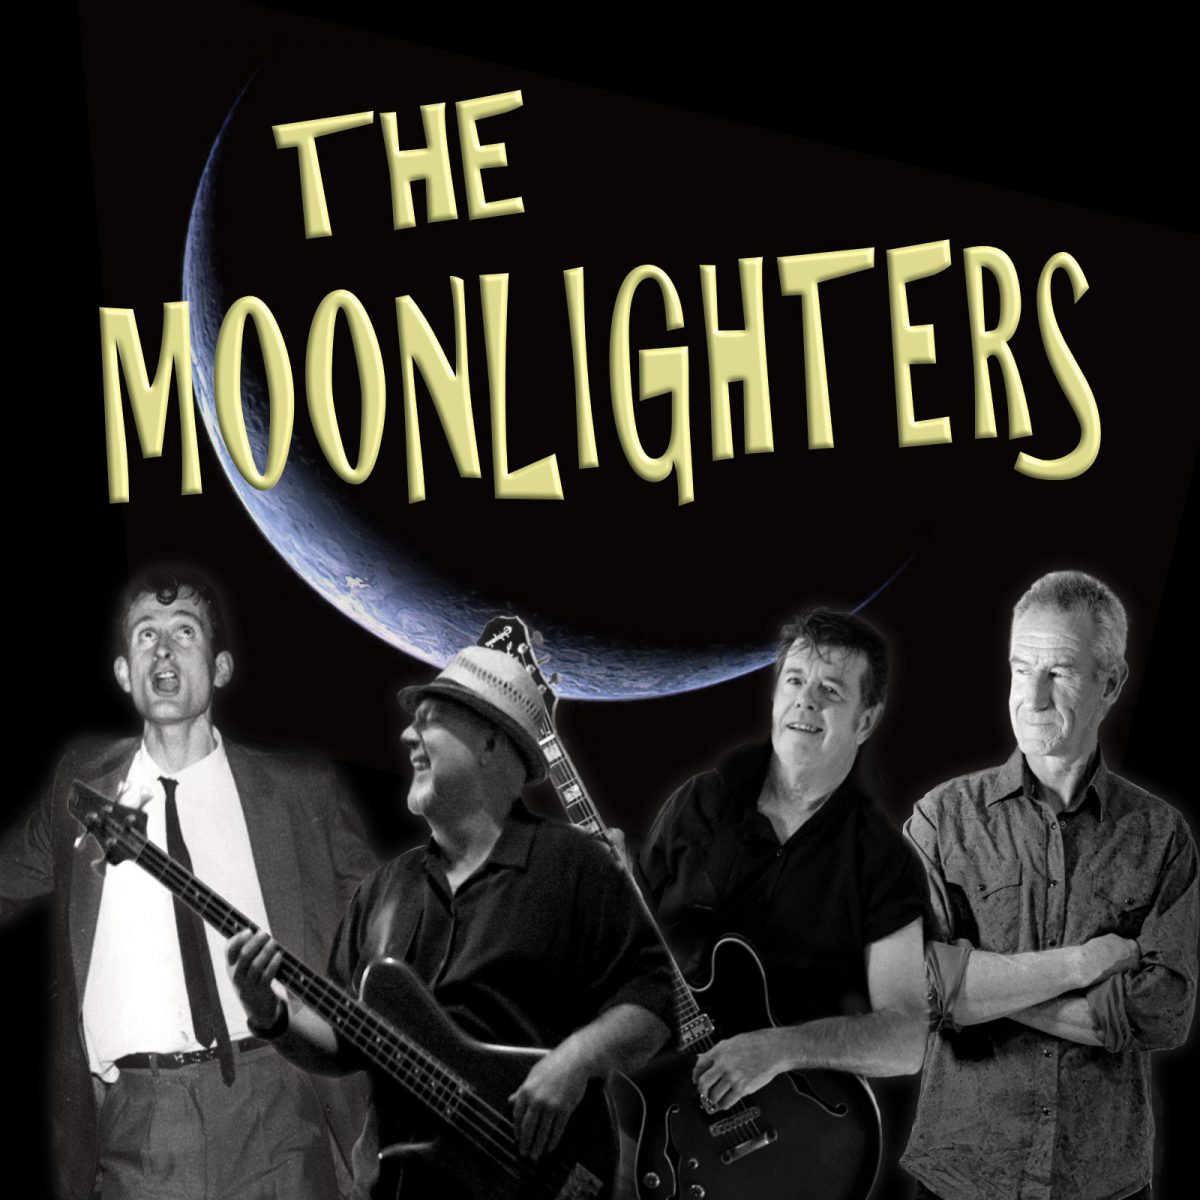 Contact us - The Moonlighters